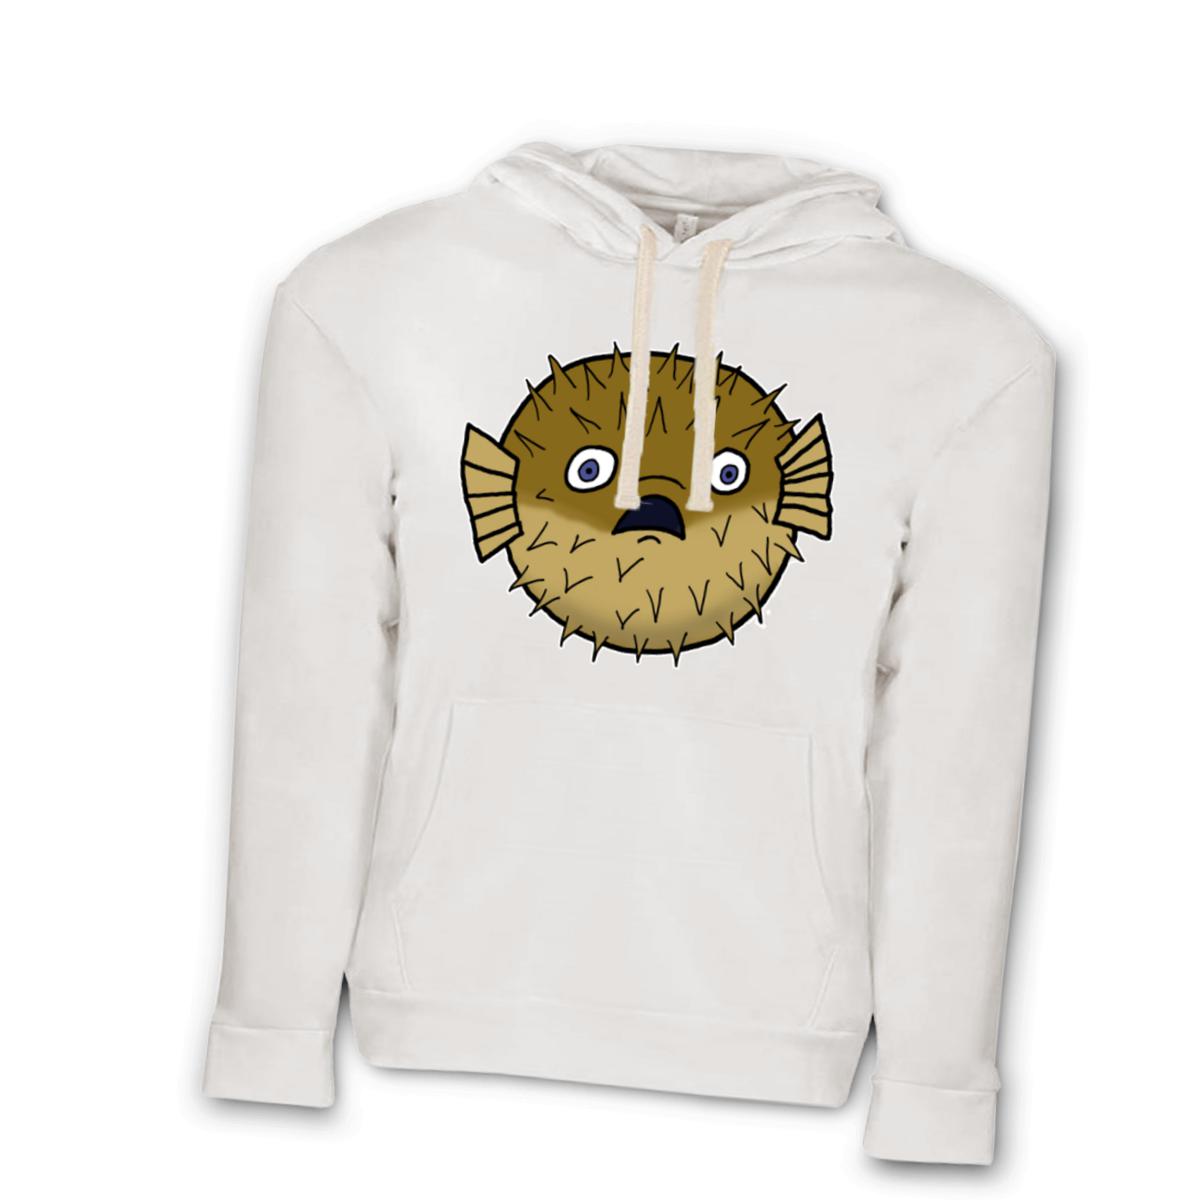 Puffer Fish Unisex Pullover Hoodie Small white